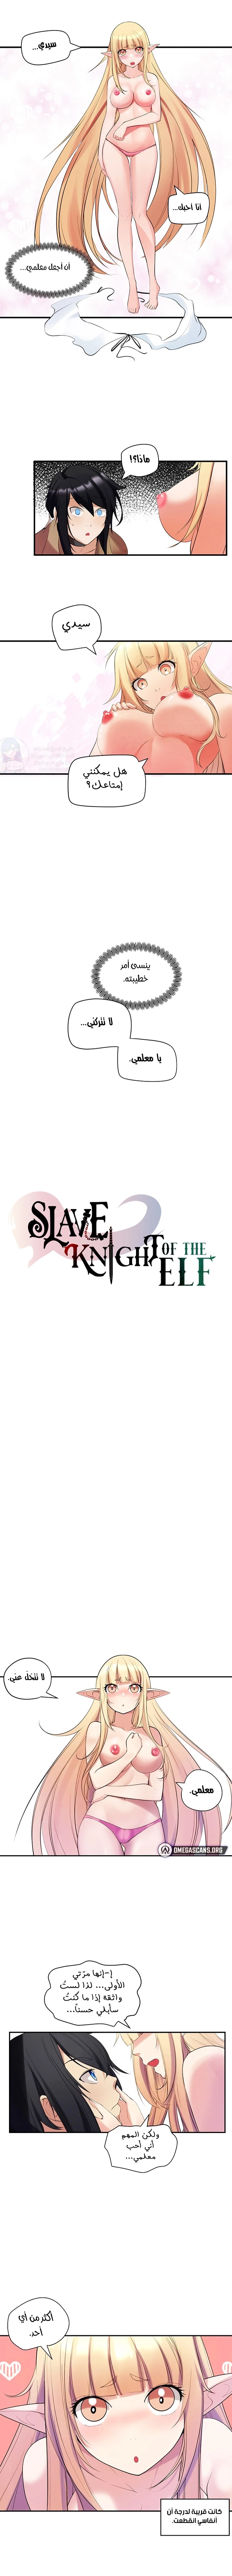 Slave Knight of the Elf - 15 - 652eb4d8aa3f5.webp